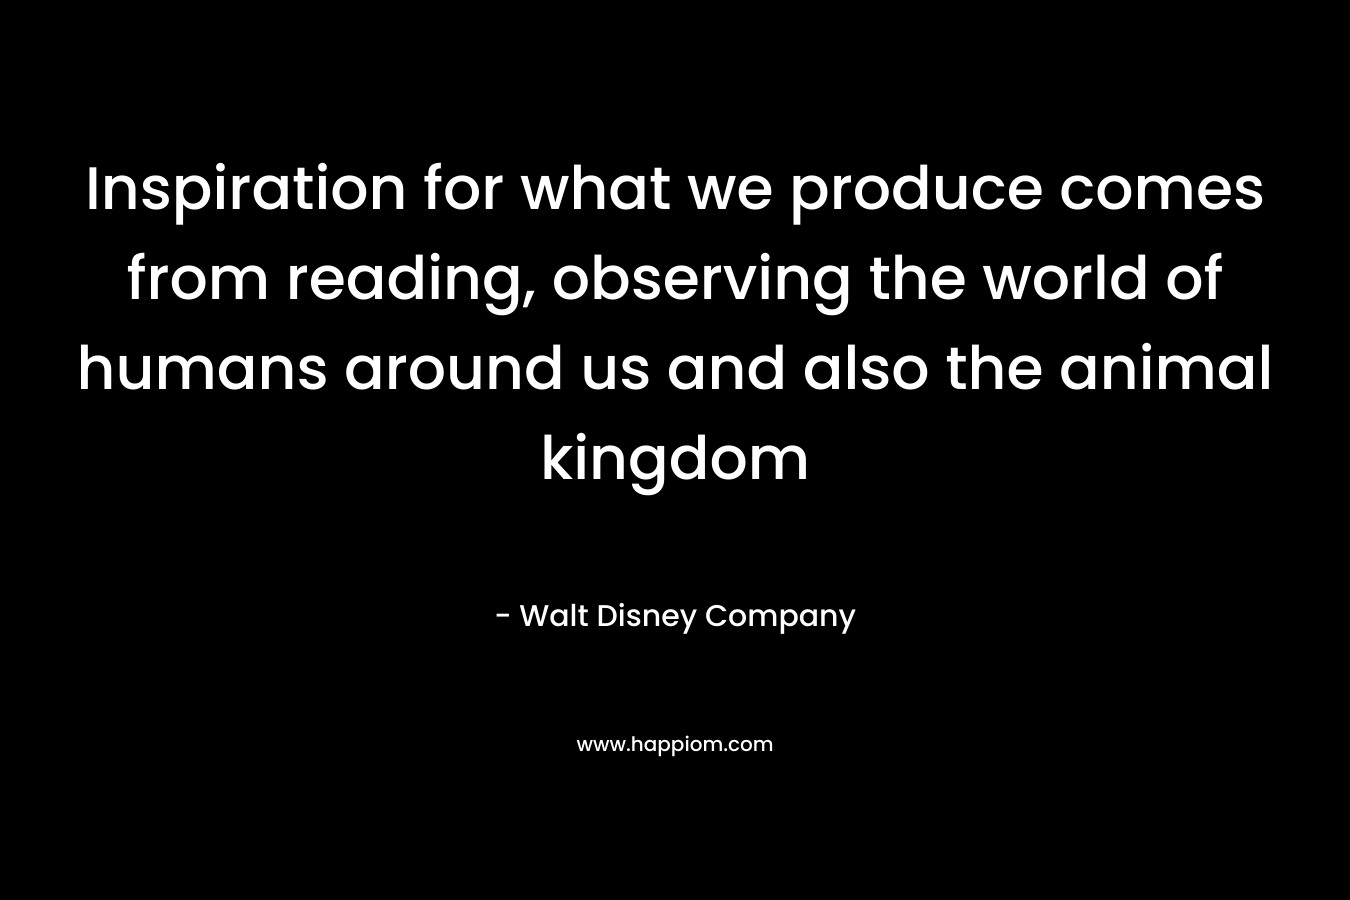 Inspiration for what we produce comes from reading, observing the world of humans around us and also the animal kingdom